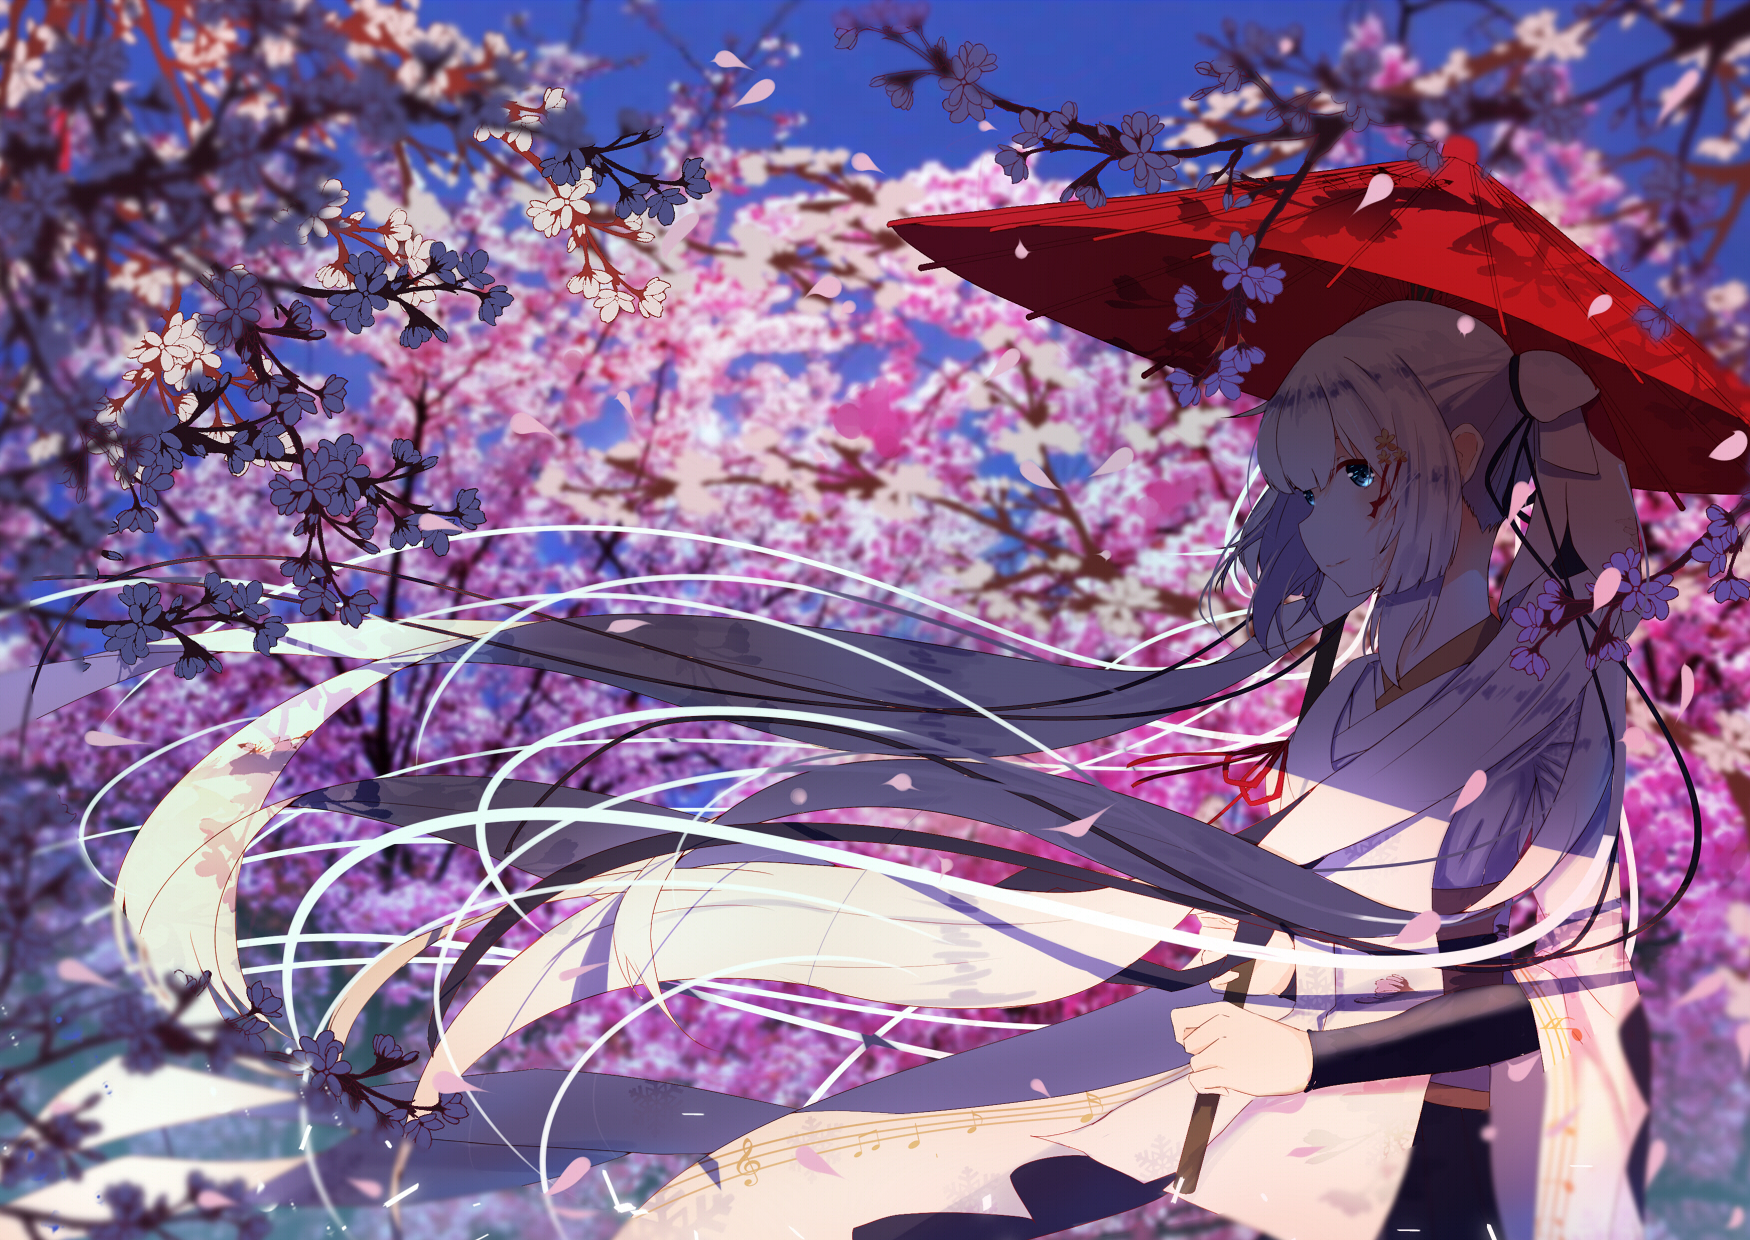 Anime 1750x1240 anime anime girls long hair umbrella branch flowers trees smiling blonde blue eyes hair blowing in the wind petals treble clef musical notes